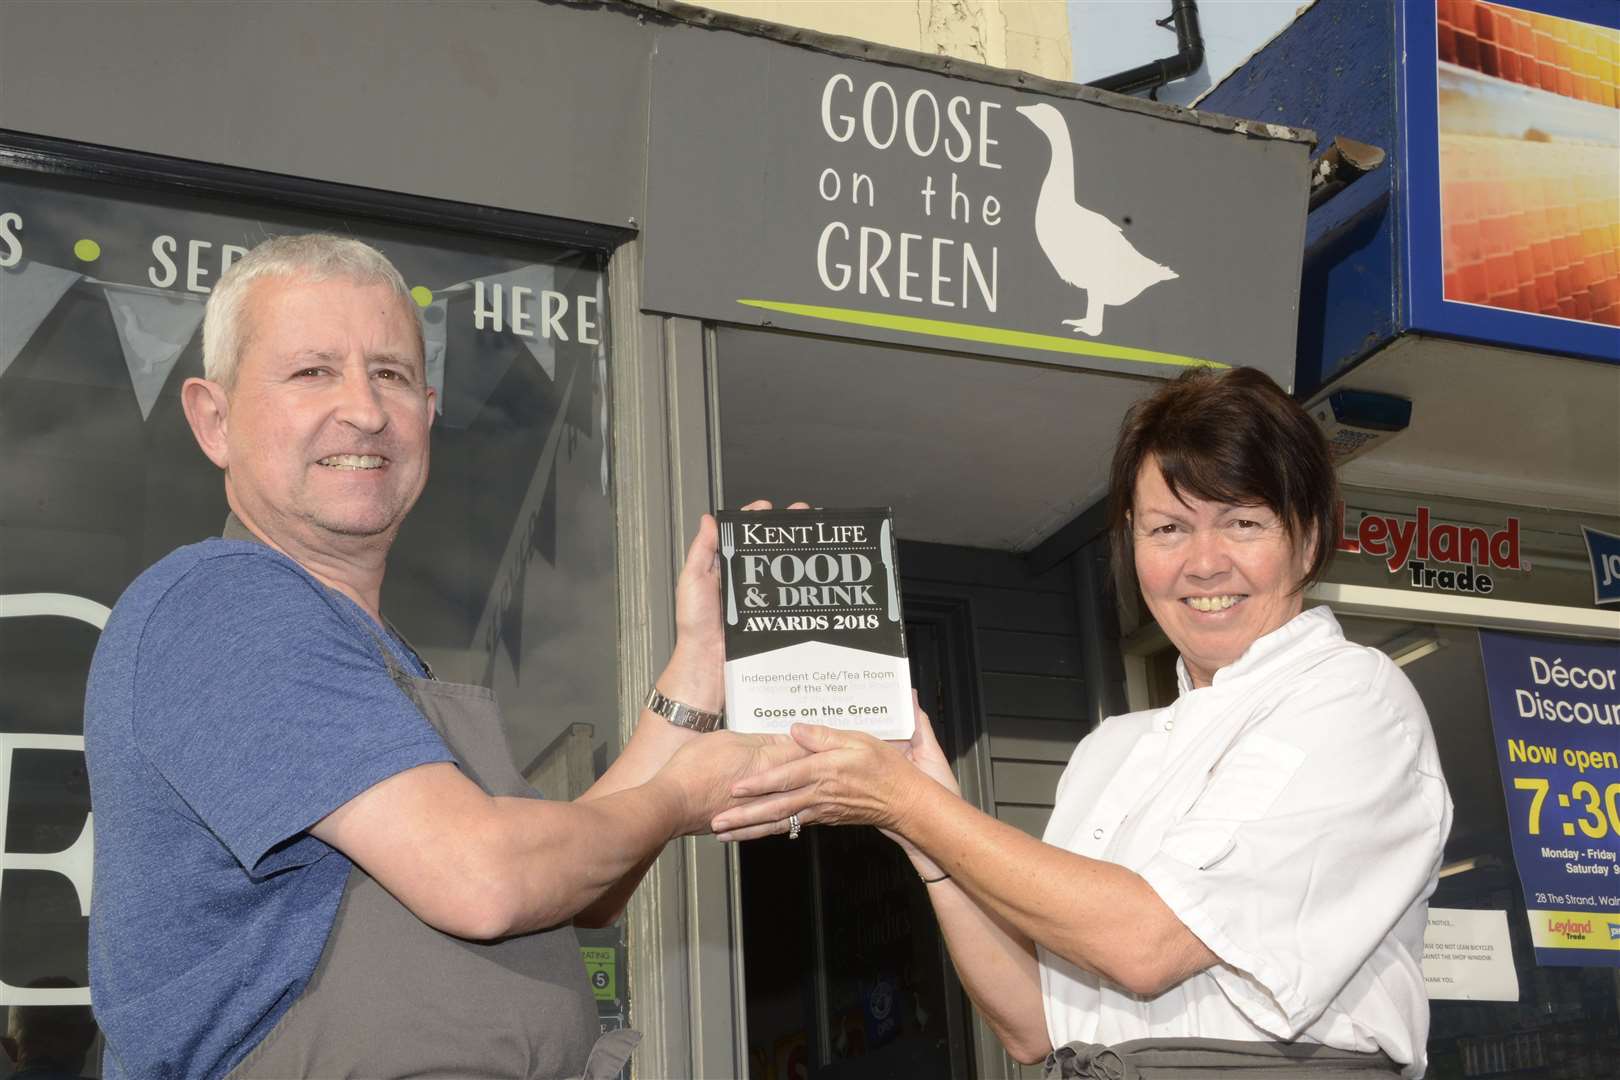 The Goose on the Green cafe won a good food and drink award in 2018. Pictured are owners Alistair and Lisa Bassett with the award. Picture: Paul Amos